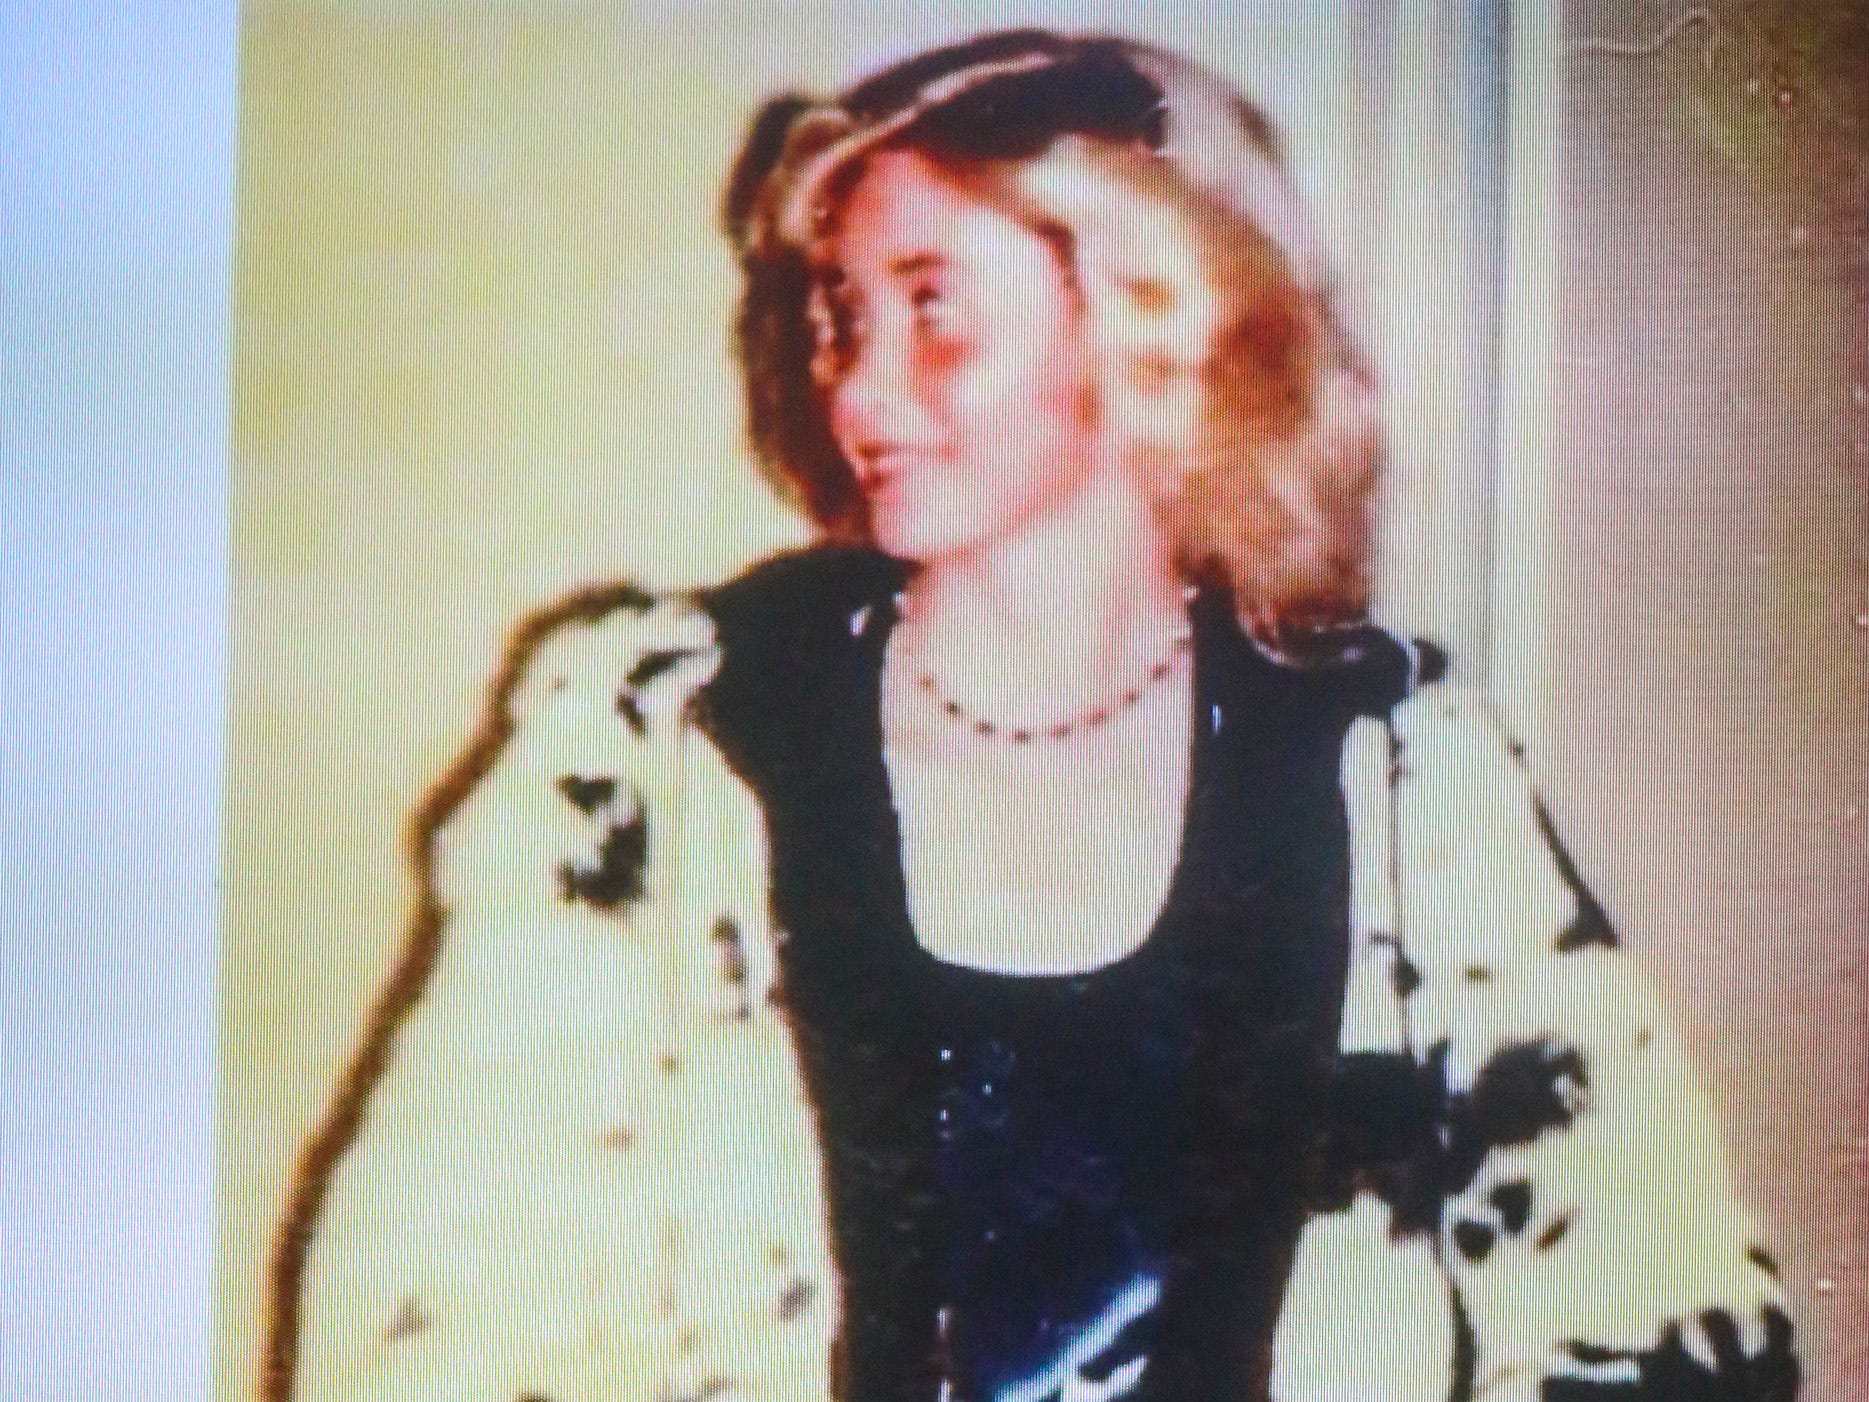 A photo of Michelle Martinko wearing the rabbit fur coat that she had on the night she was killed in 1979 is shown on a television during opening statements at the Scott County Courthouse in Davenport on Wednesday, Feb. 12, 2020.